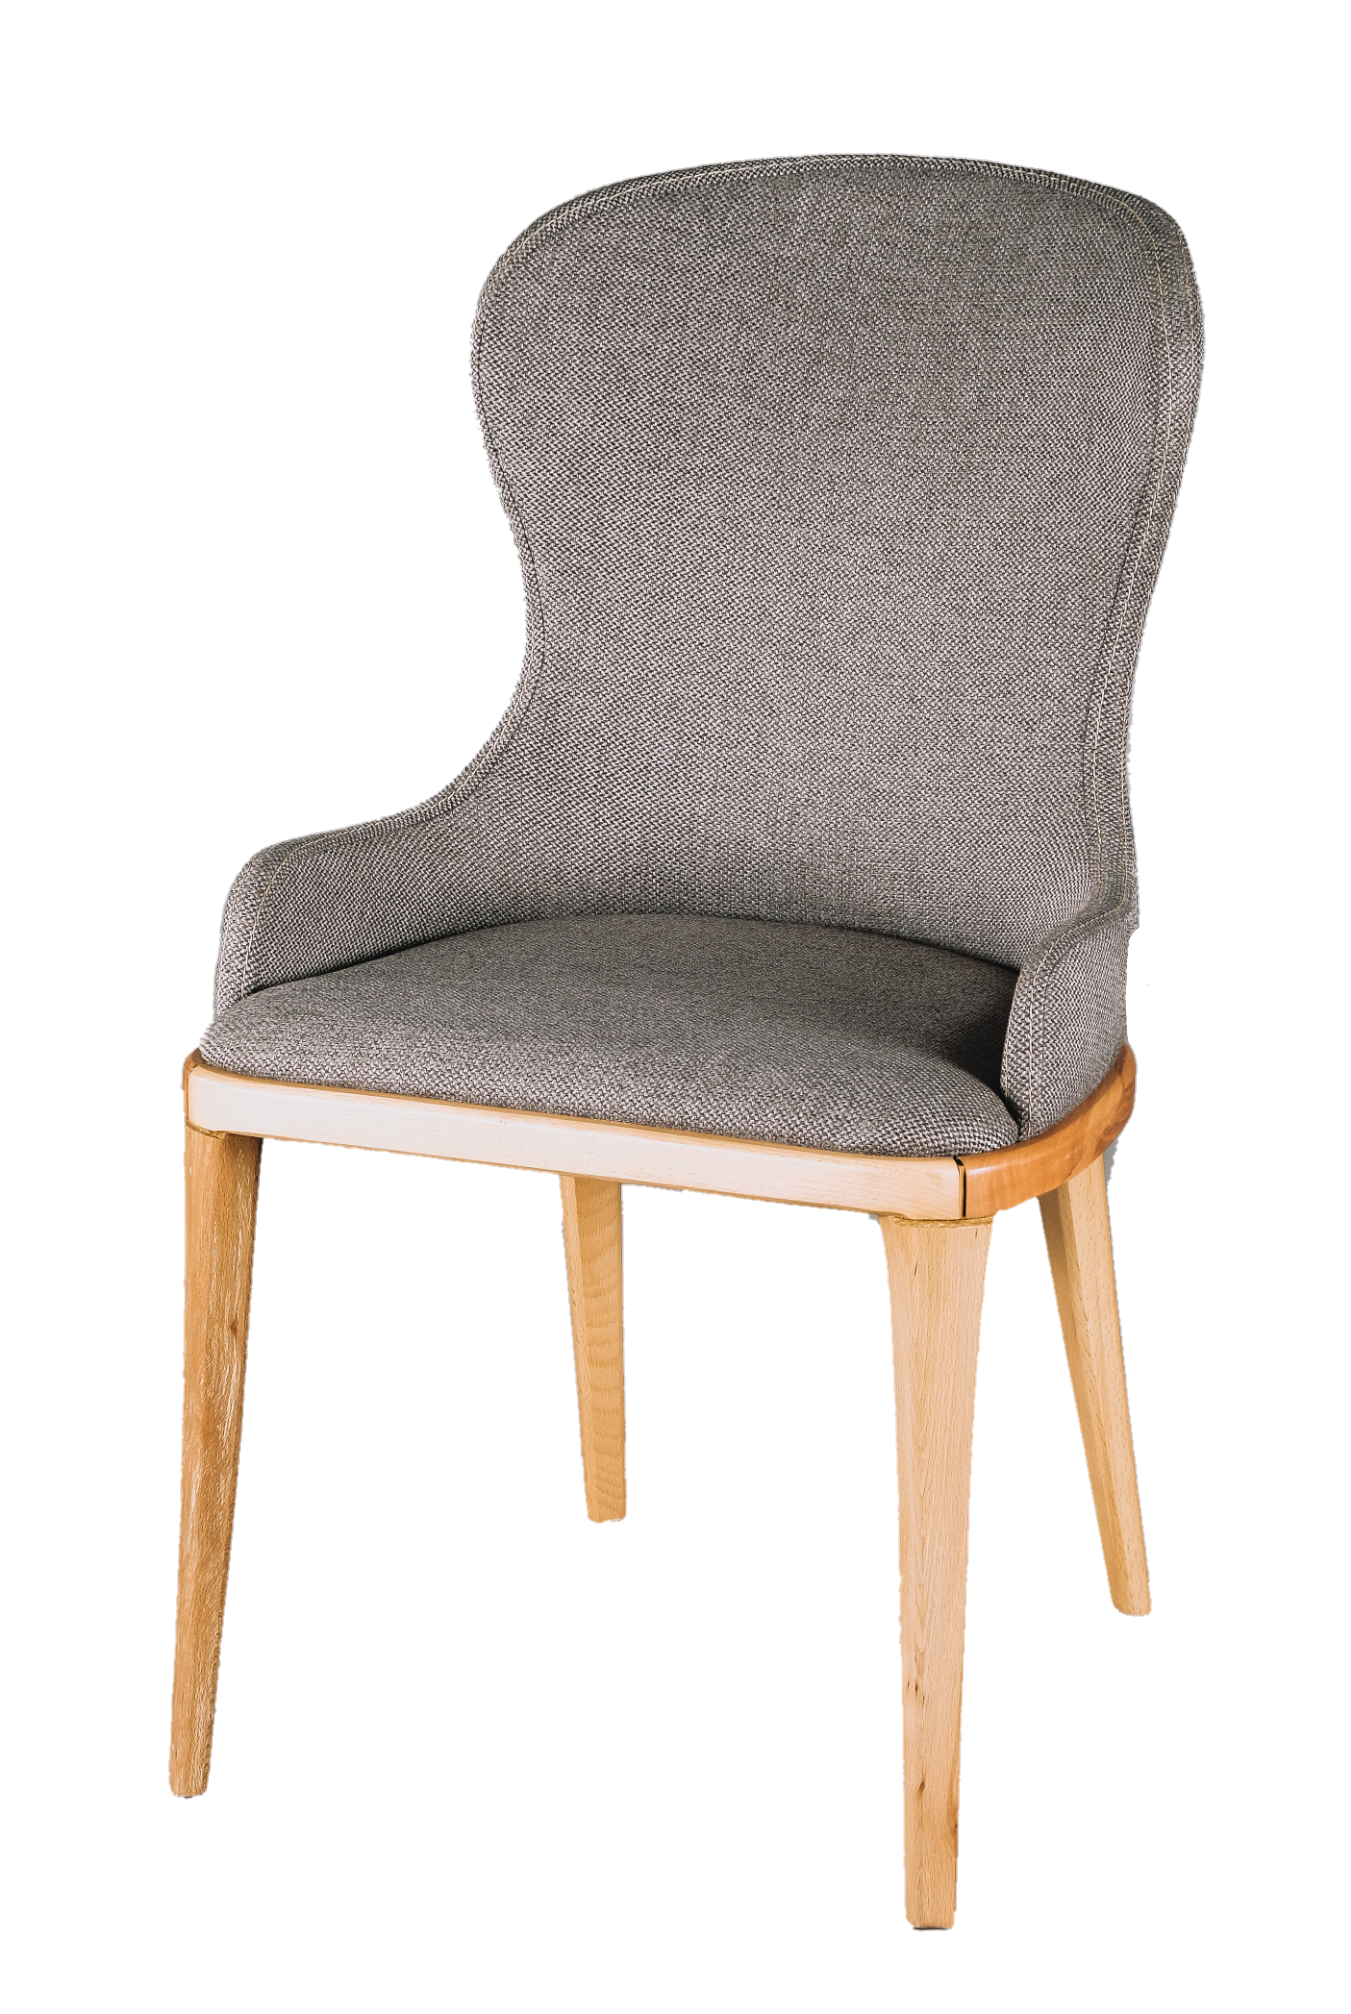 chair-png-image-pngfre-2